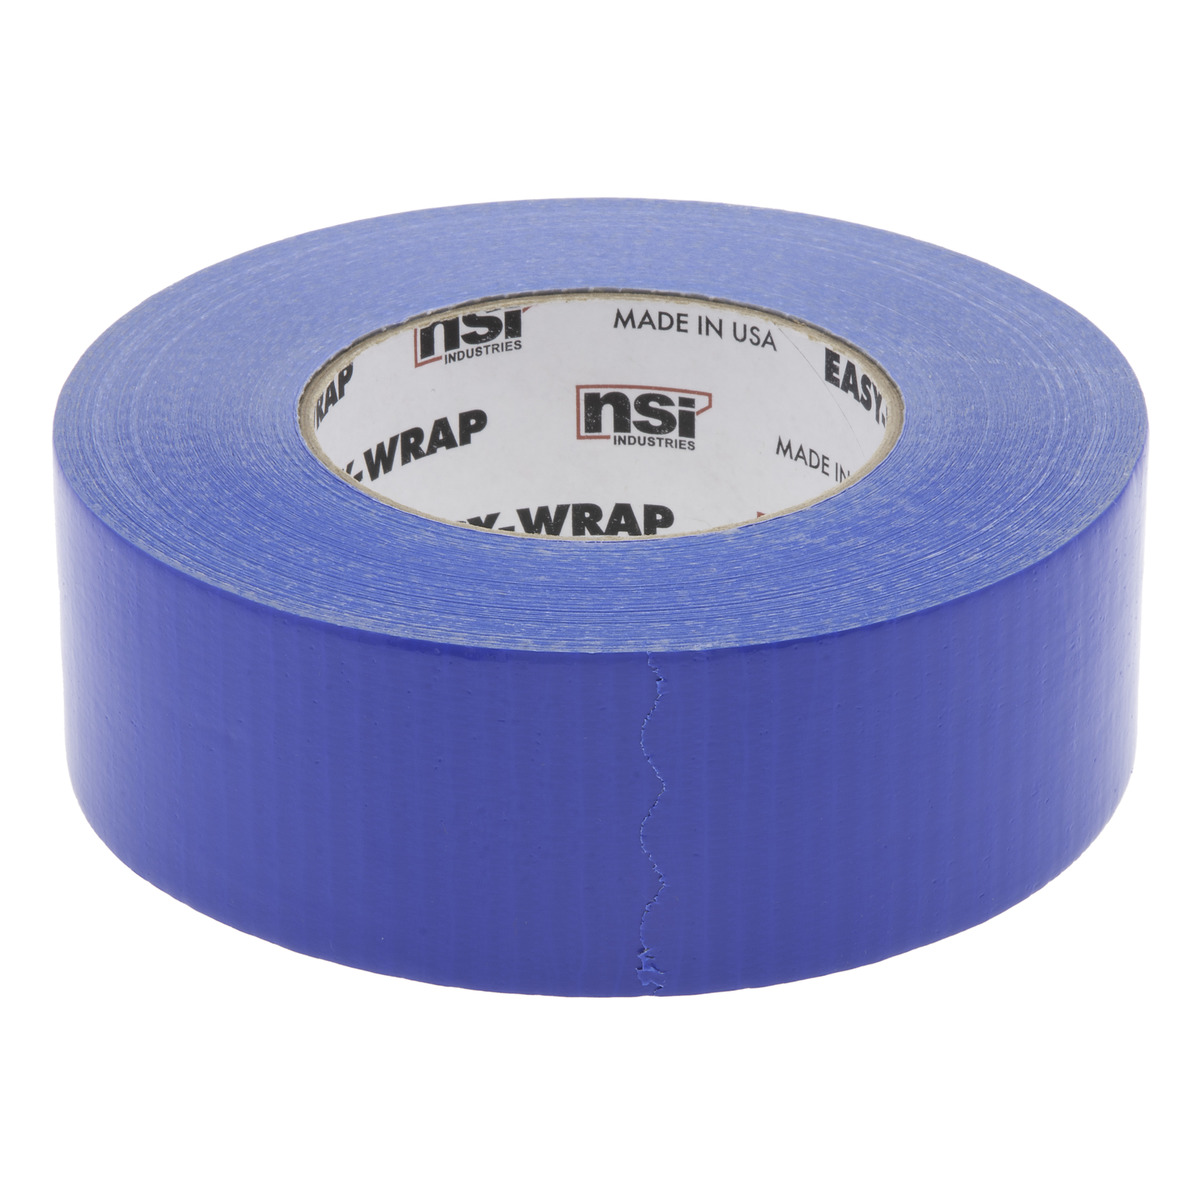 CLOTH DUCT TAPE